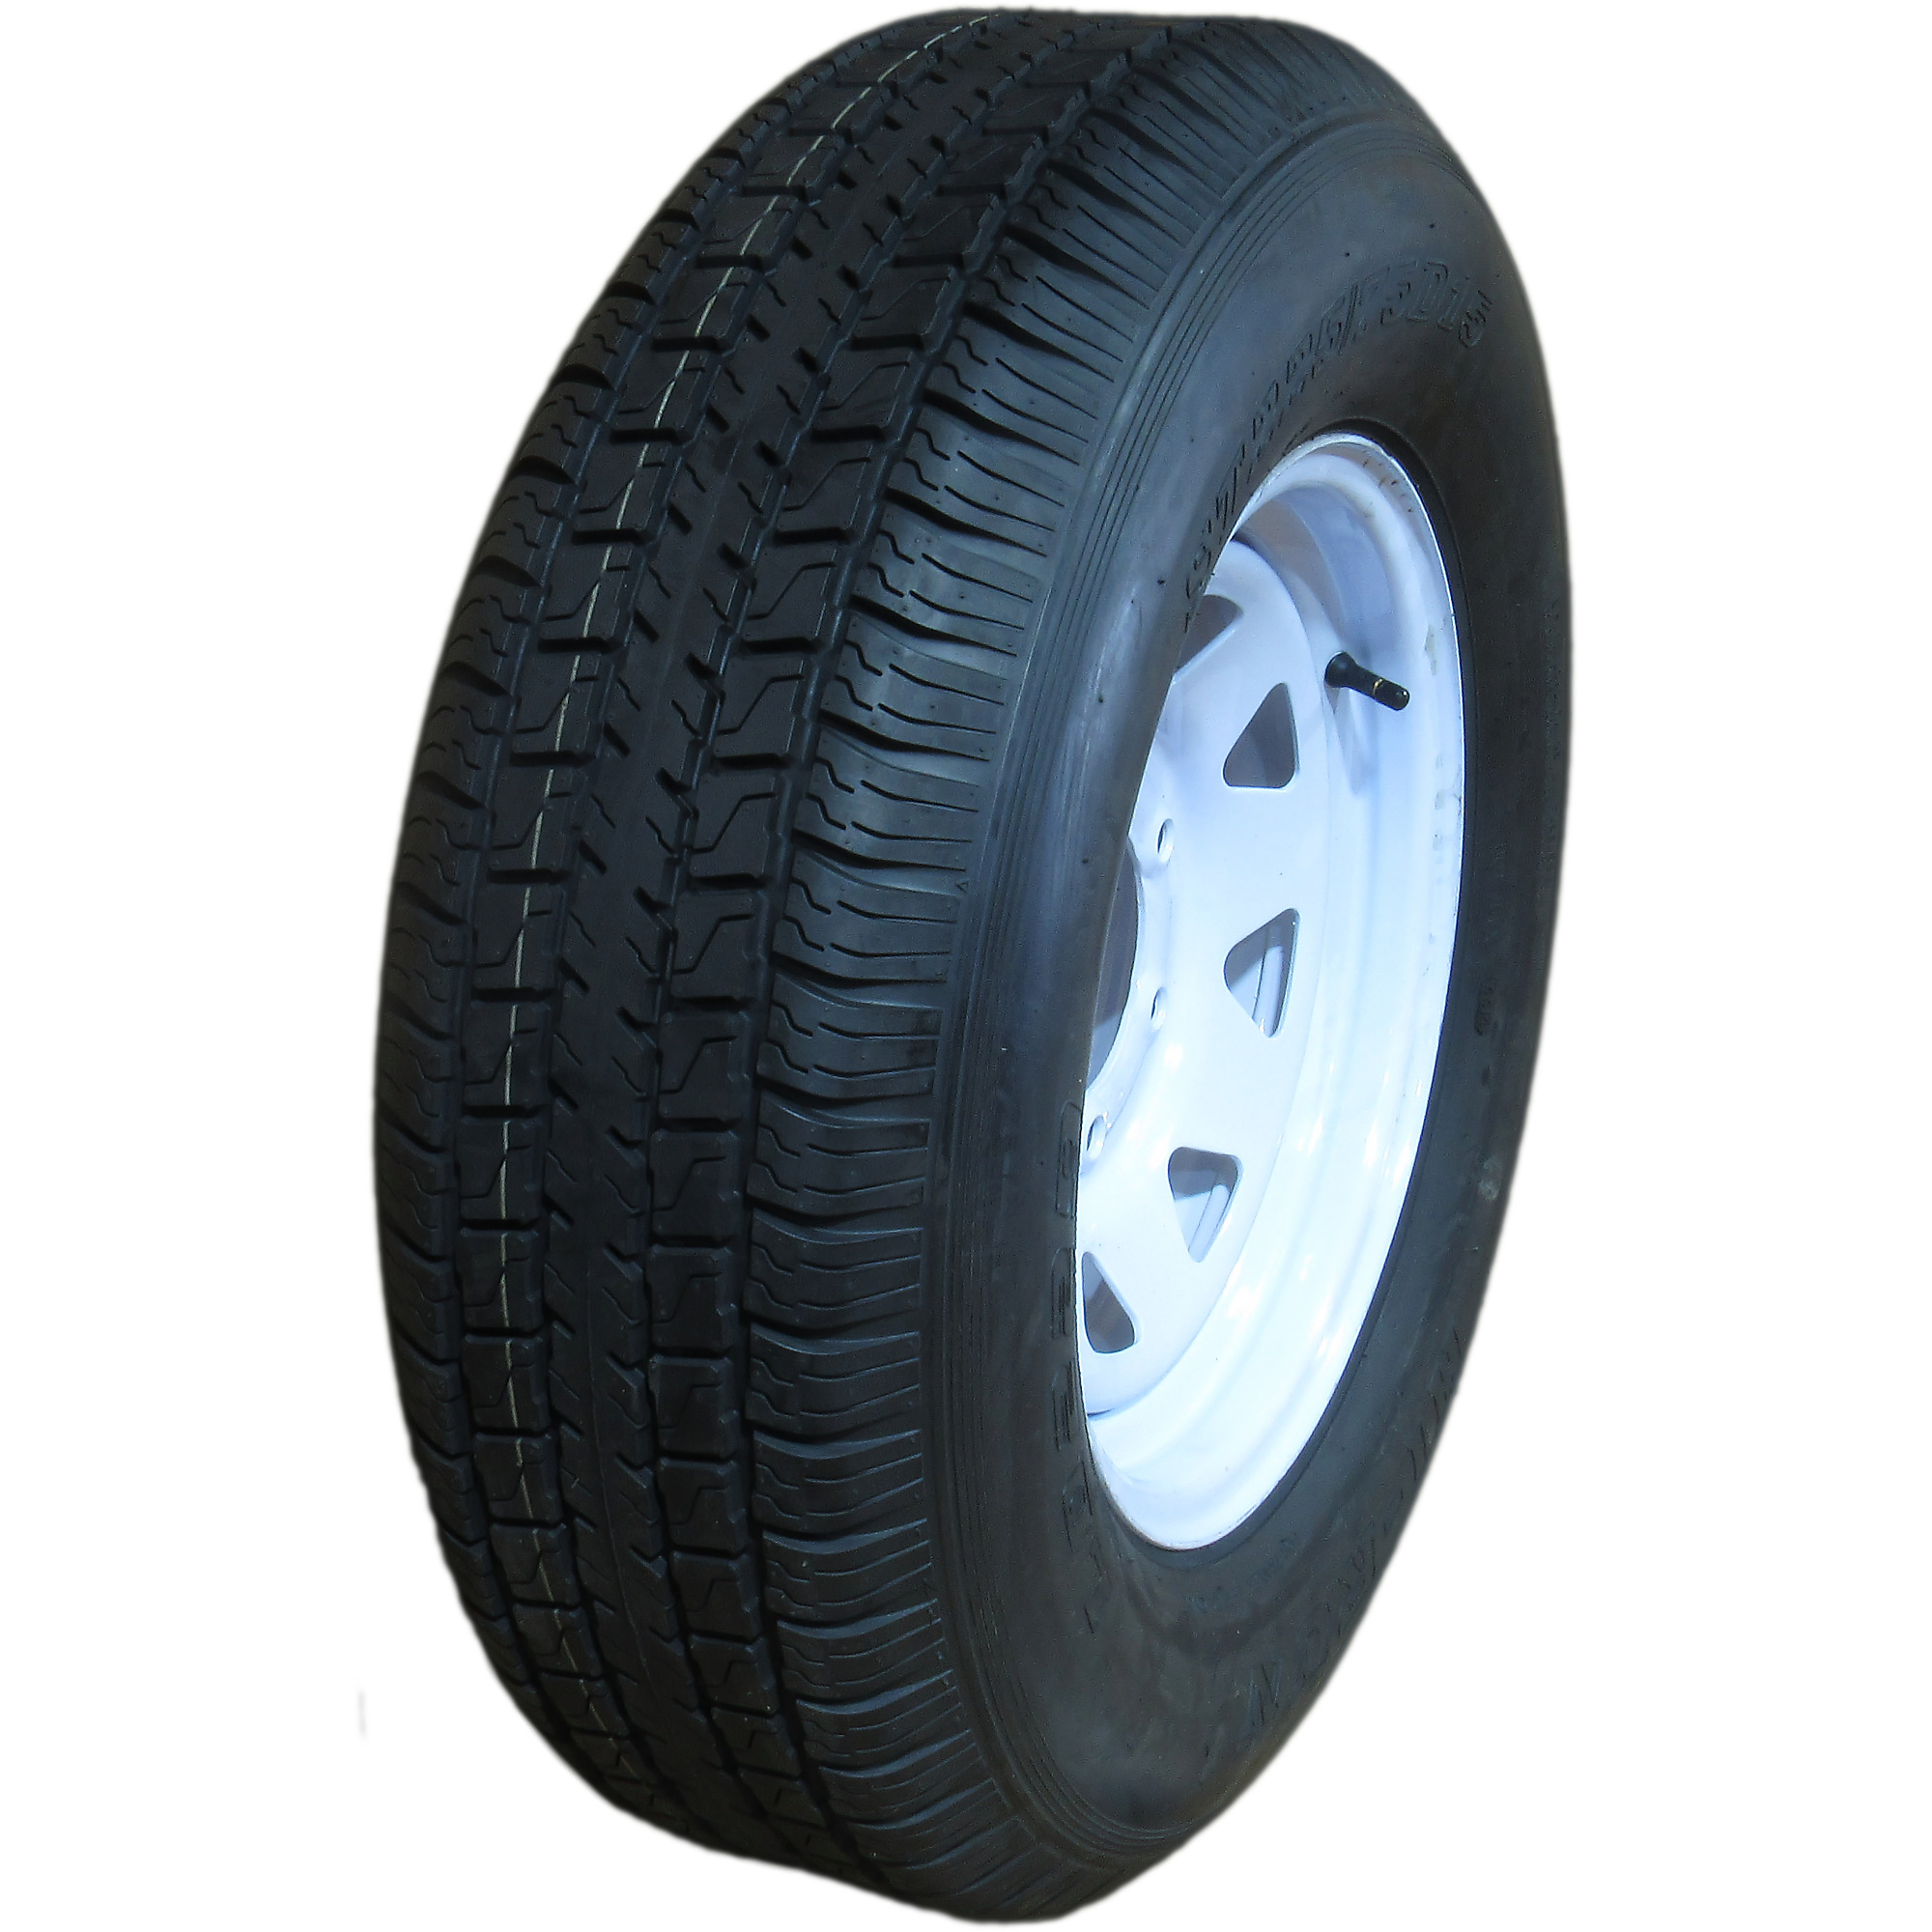 HI-RUN, Highway Trailer Tire Assembly, Bias-Ply, Spoked, Tire Size ST225/75D15 Load Range Rating D, Bolt Holes (qty.) 6 Model ASB1006